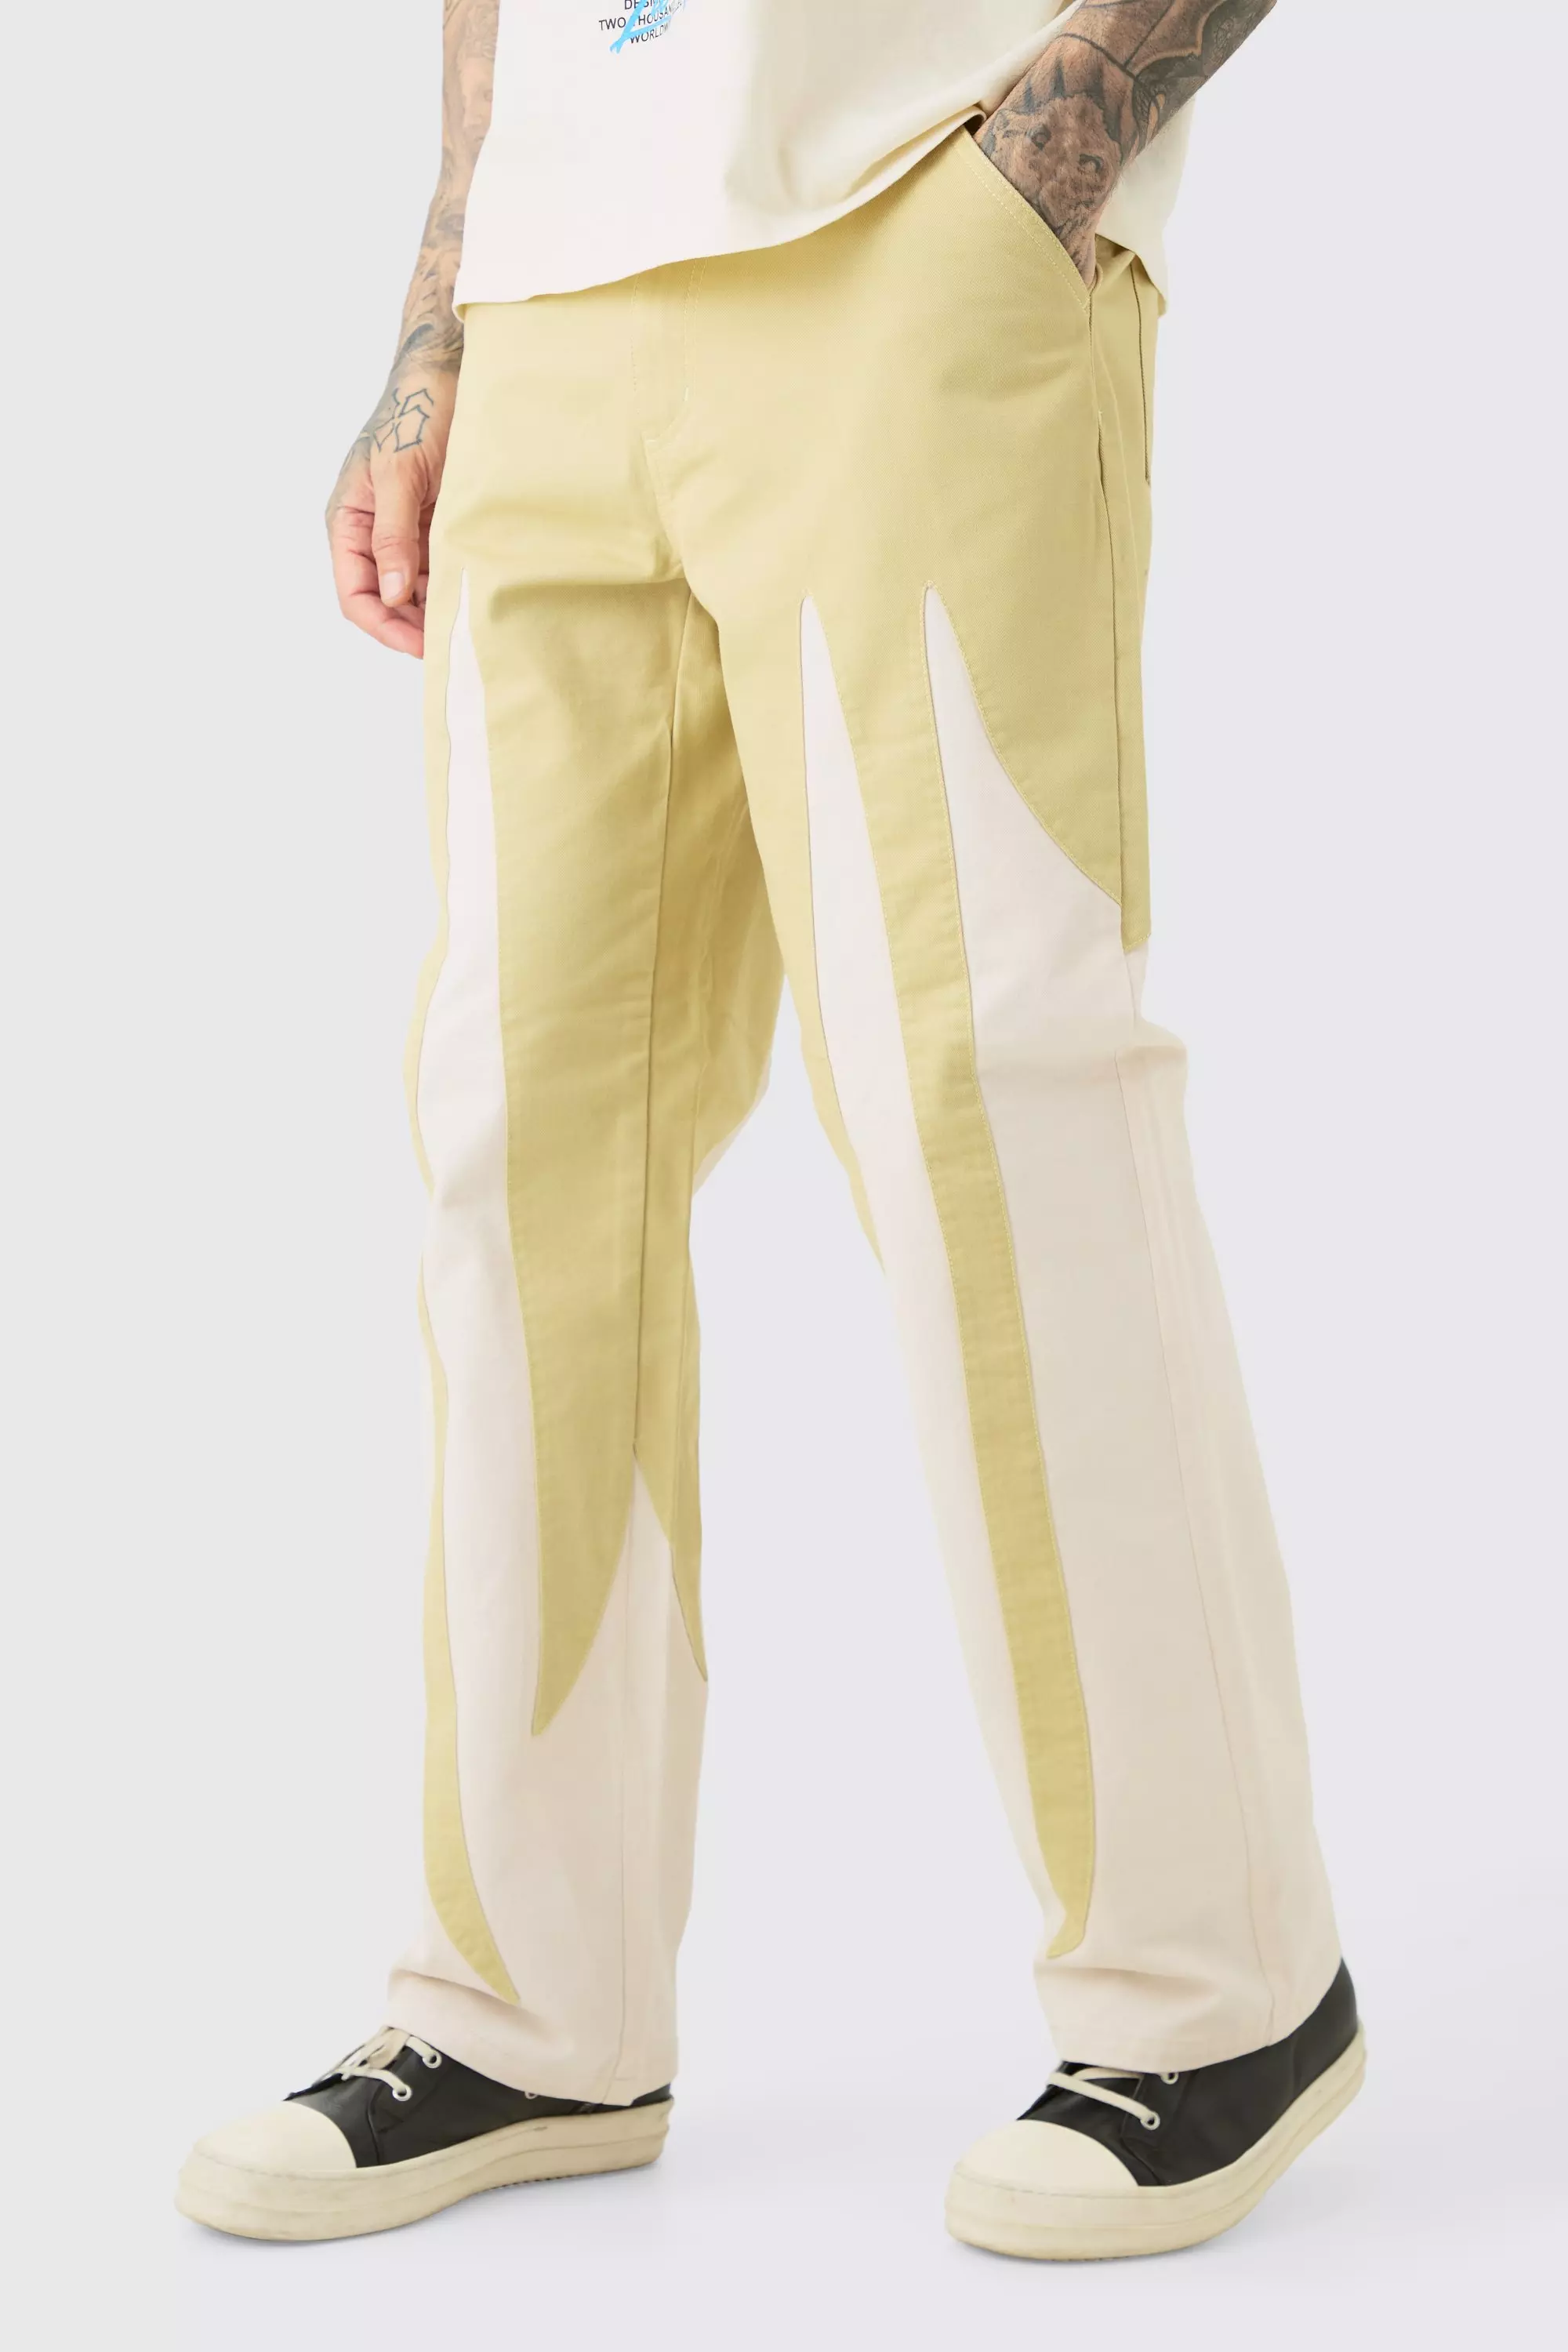 Tall Fixed Waist Washed Colour Block Twill Trouser Sage